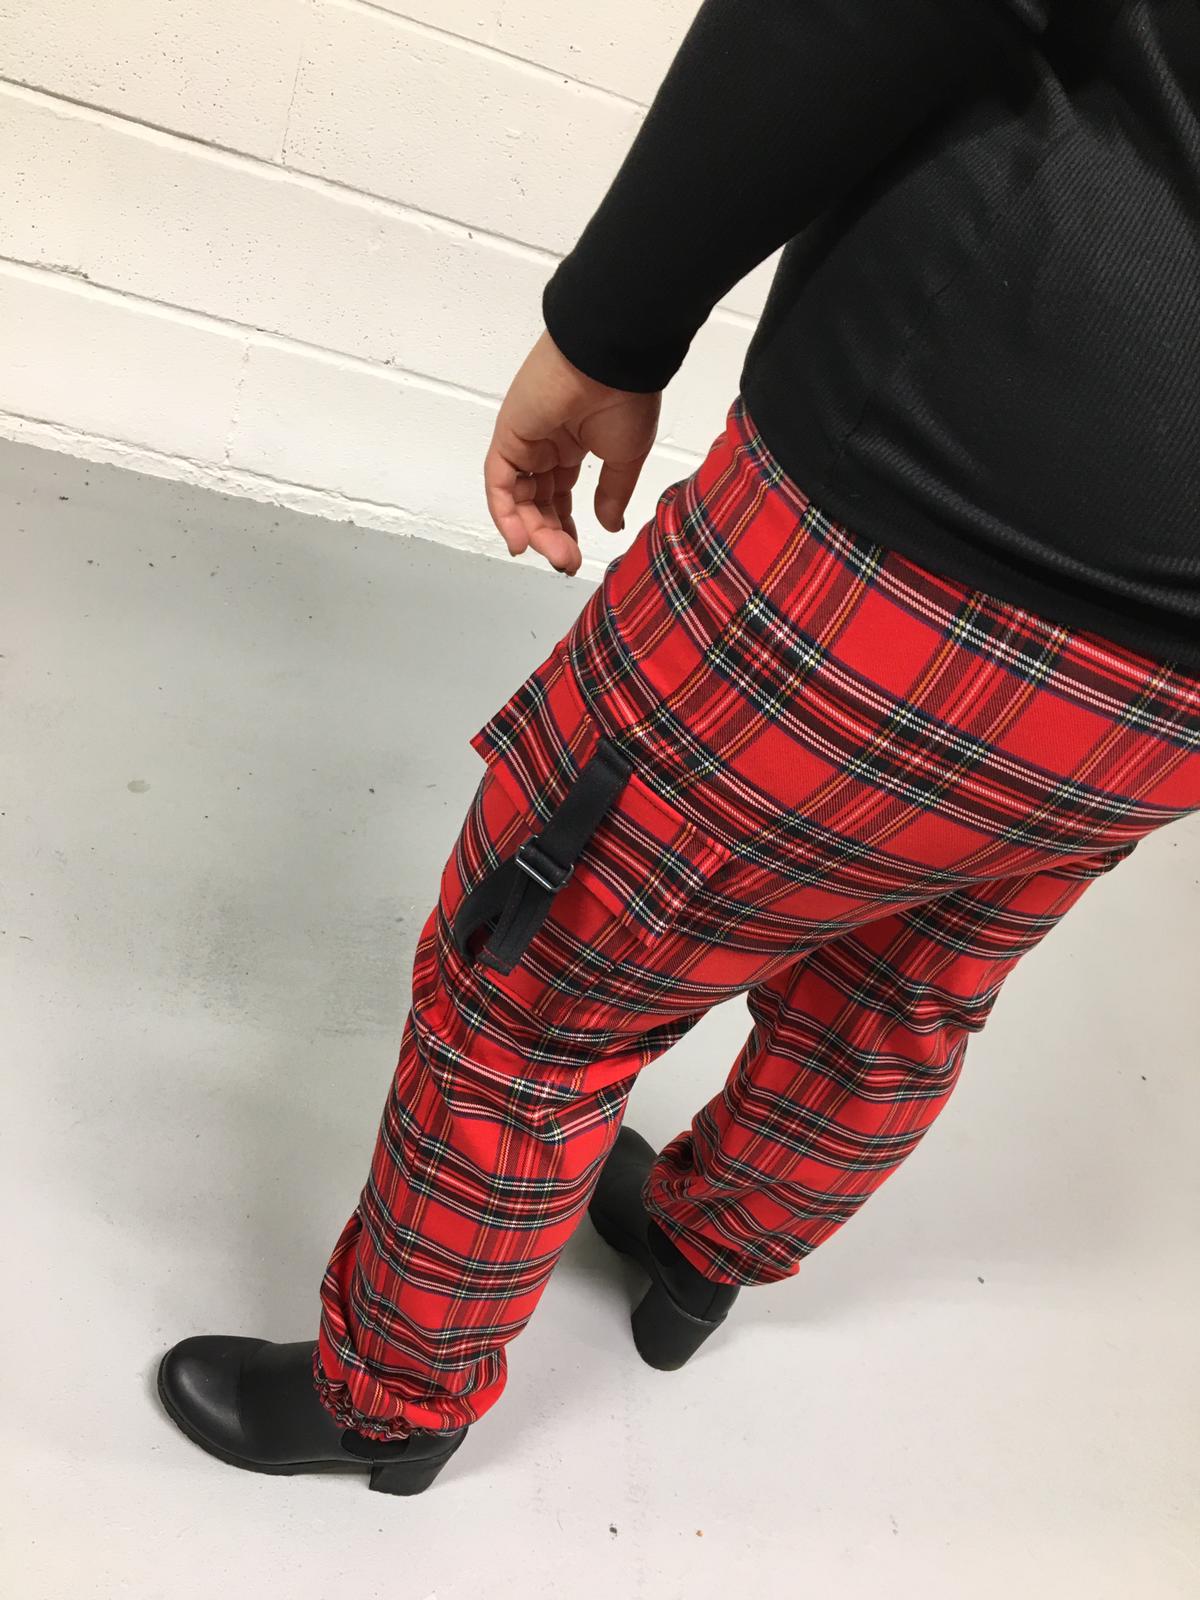 8 Yards Tartan Trousers, Black Watch - Highland Outfits from 8 Yards Ltd. UK